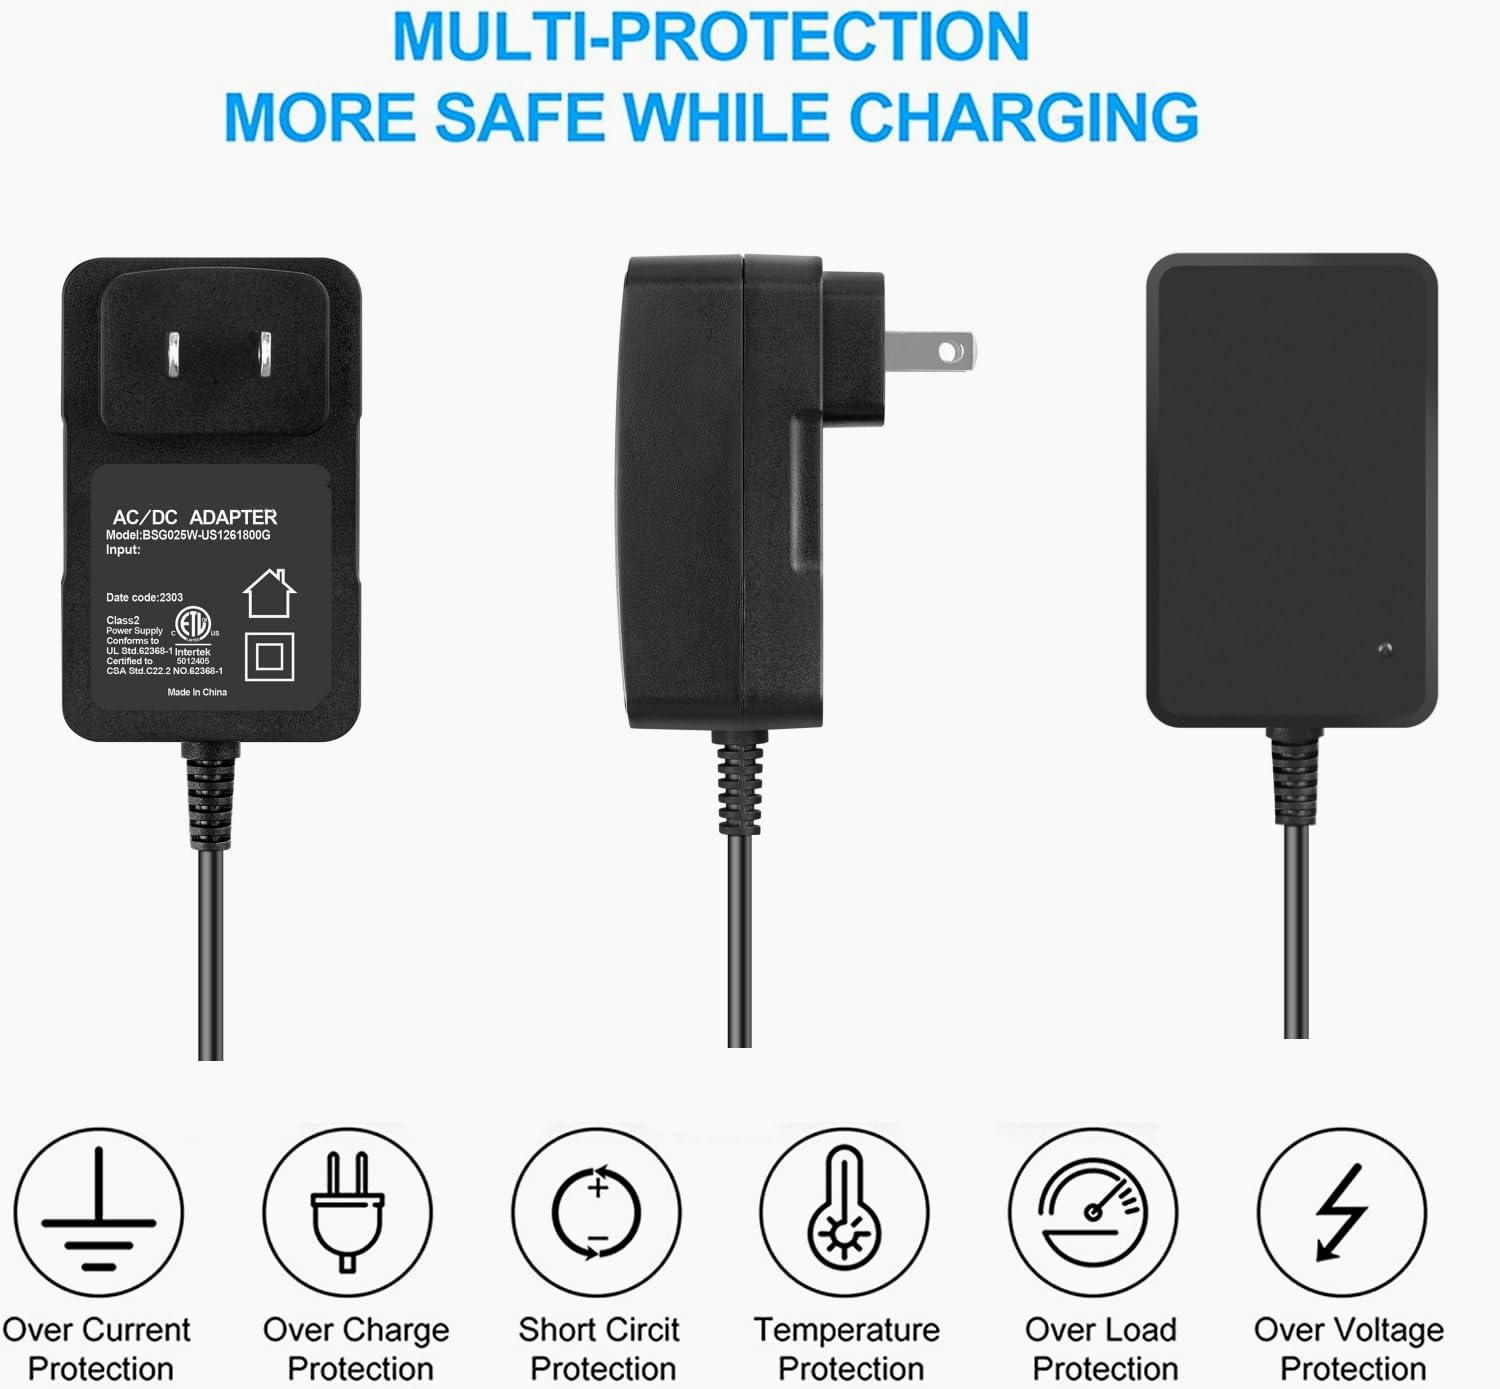 Digipartspower 12.6V 2-Prong AC/DC Adapter Compatible with Aiper Seagull 800 800B SE Cordless Robotic Pool Cleaner Lithium Ion Battery 12.6VDC 1.8A DC12.6V 1800mA Power Supply Cord Cable Wall Charger